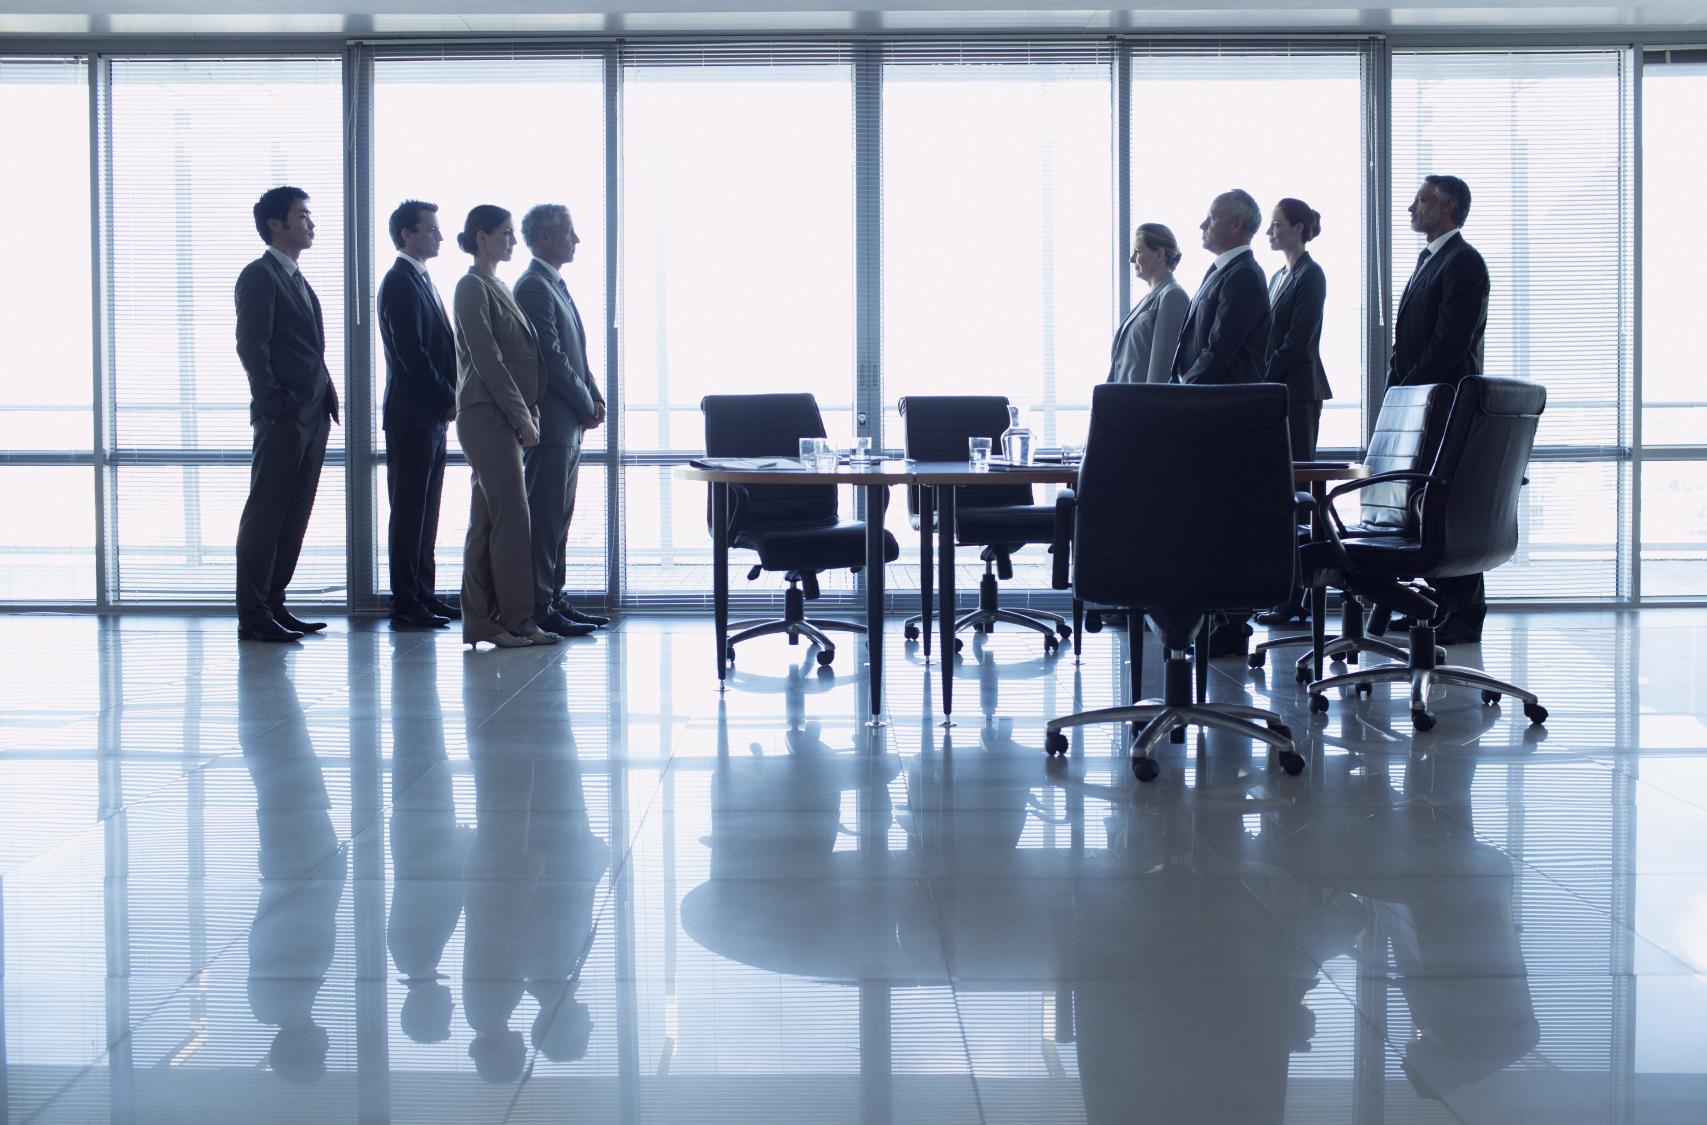 Separate groups of business people facing off in conference room